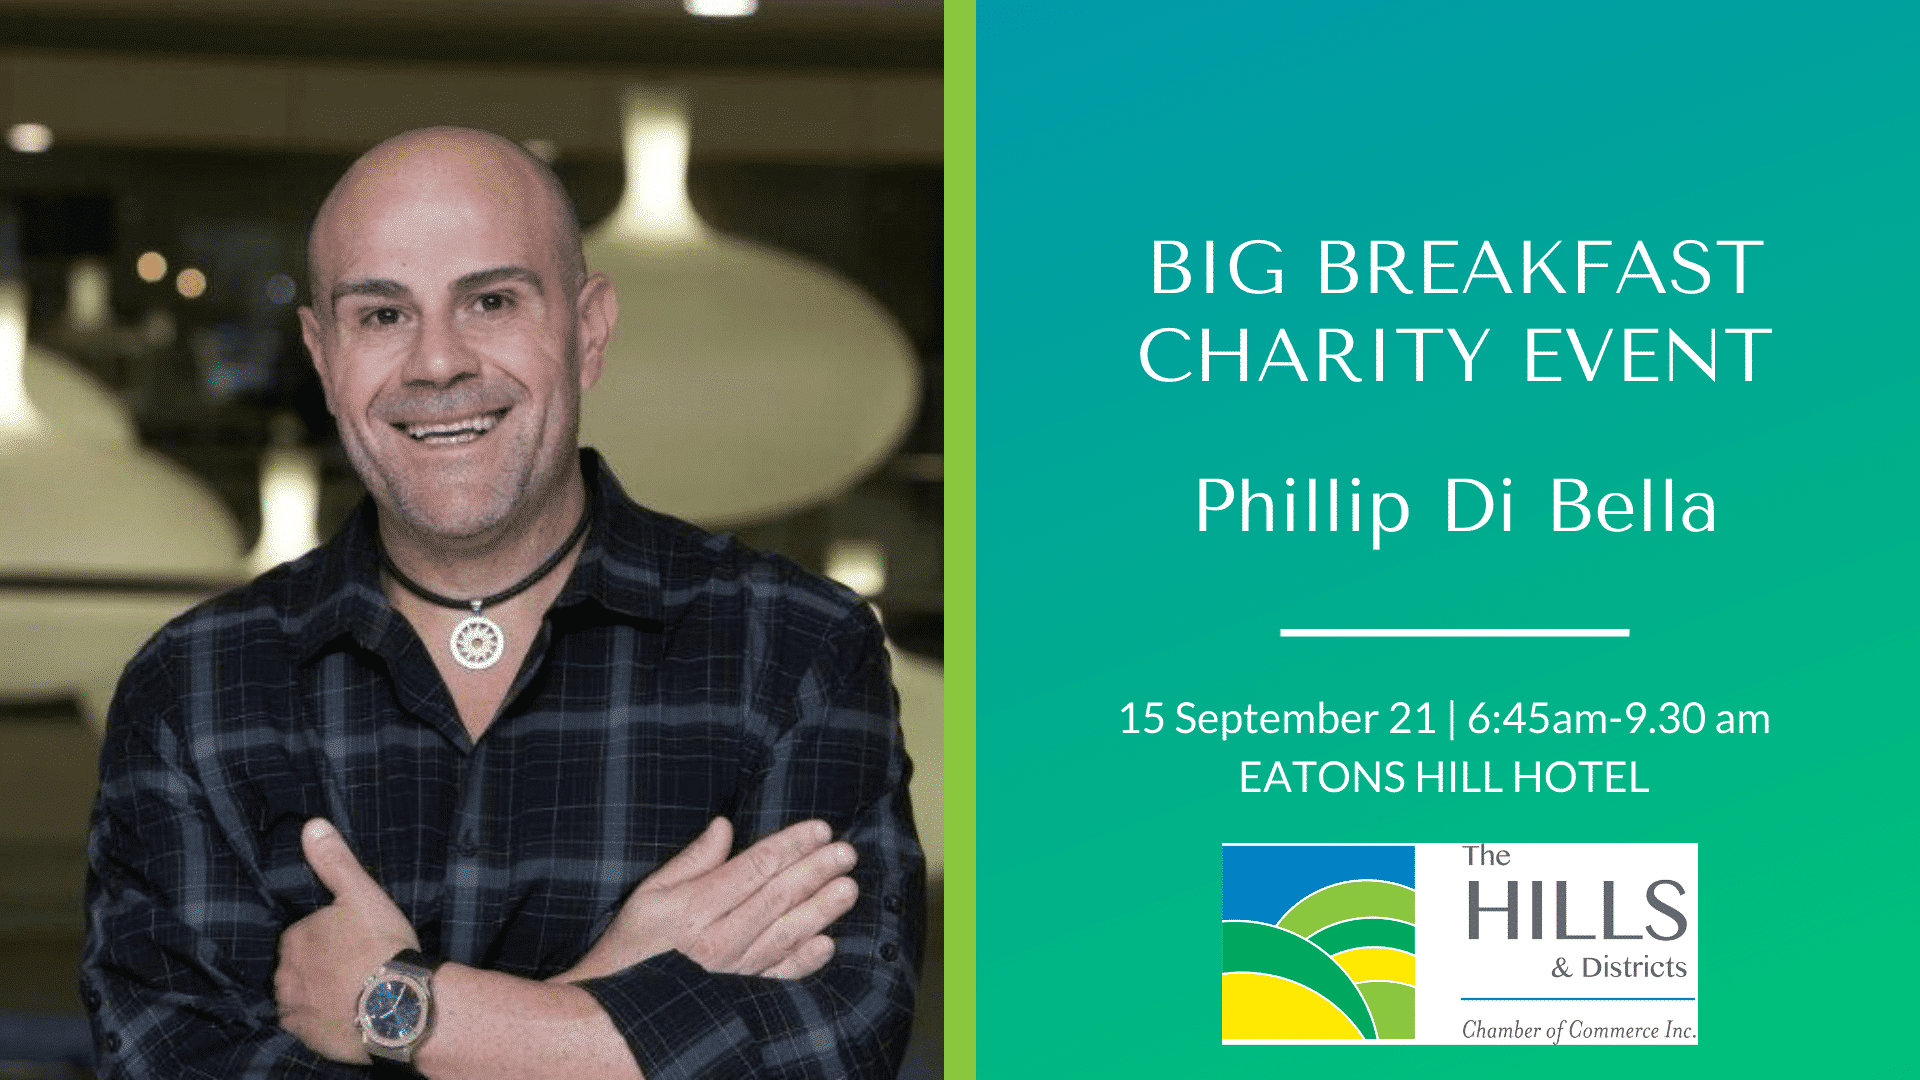 Early Bird Tickets Are Now Available For The Big Breakfast